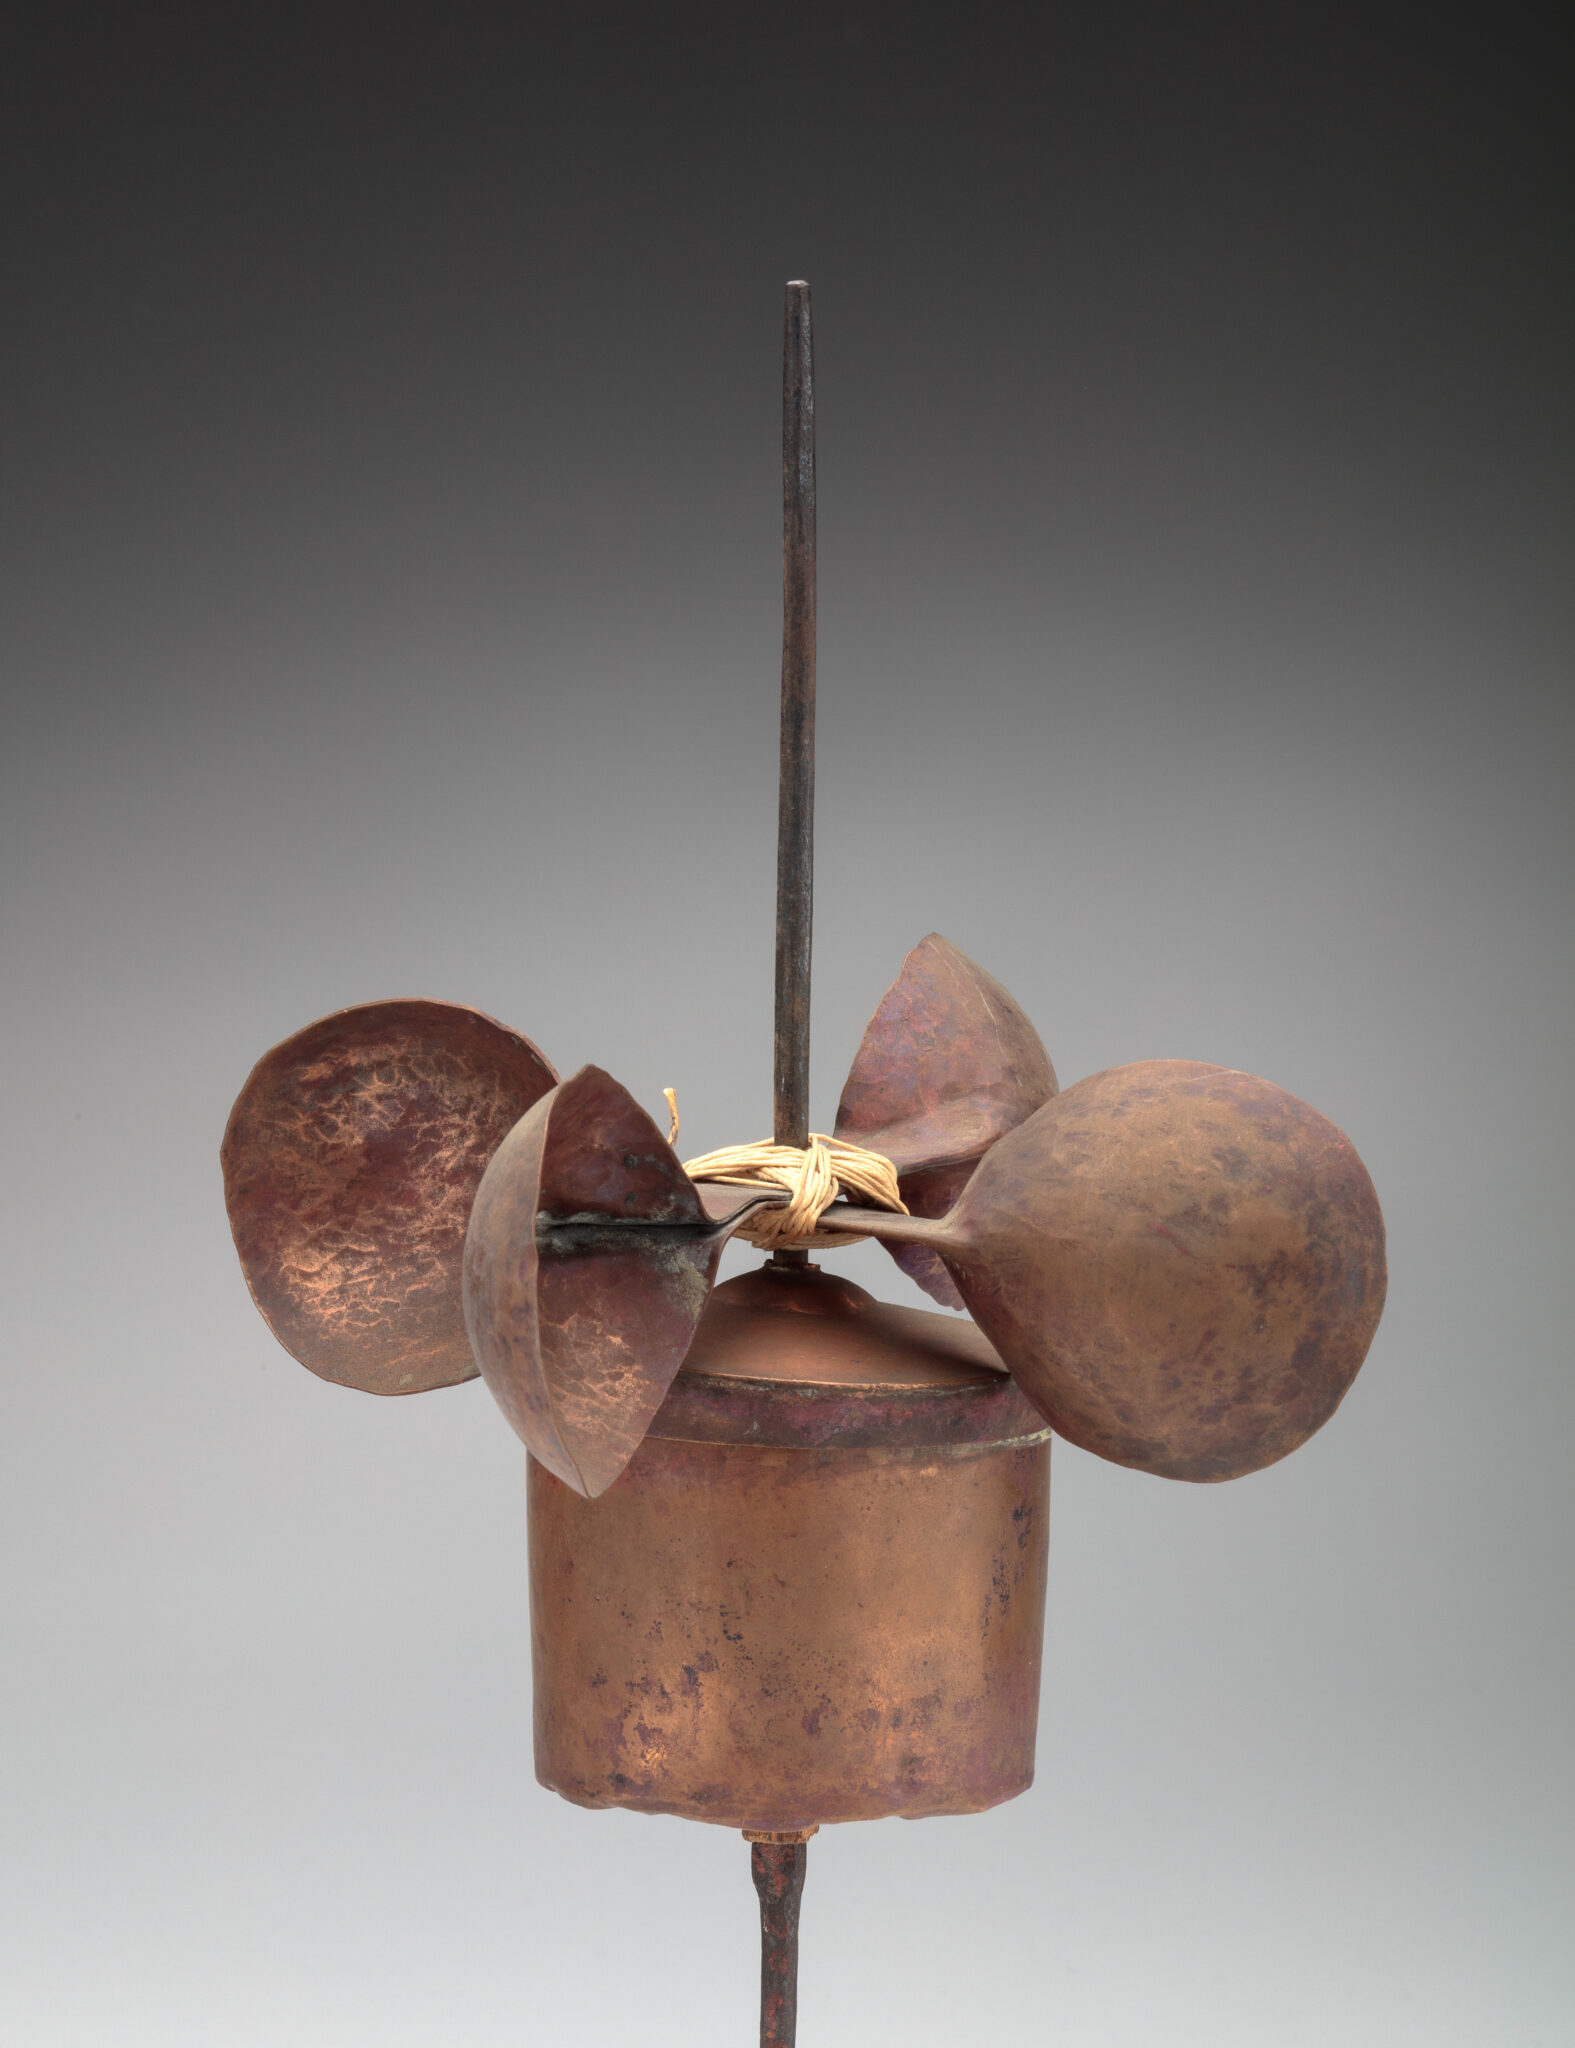 Copper-colored device consisting of cylinder and four cup-shaped objects on their sides mounted on lower third of spindle